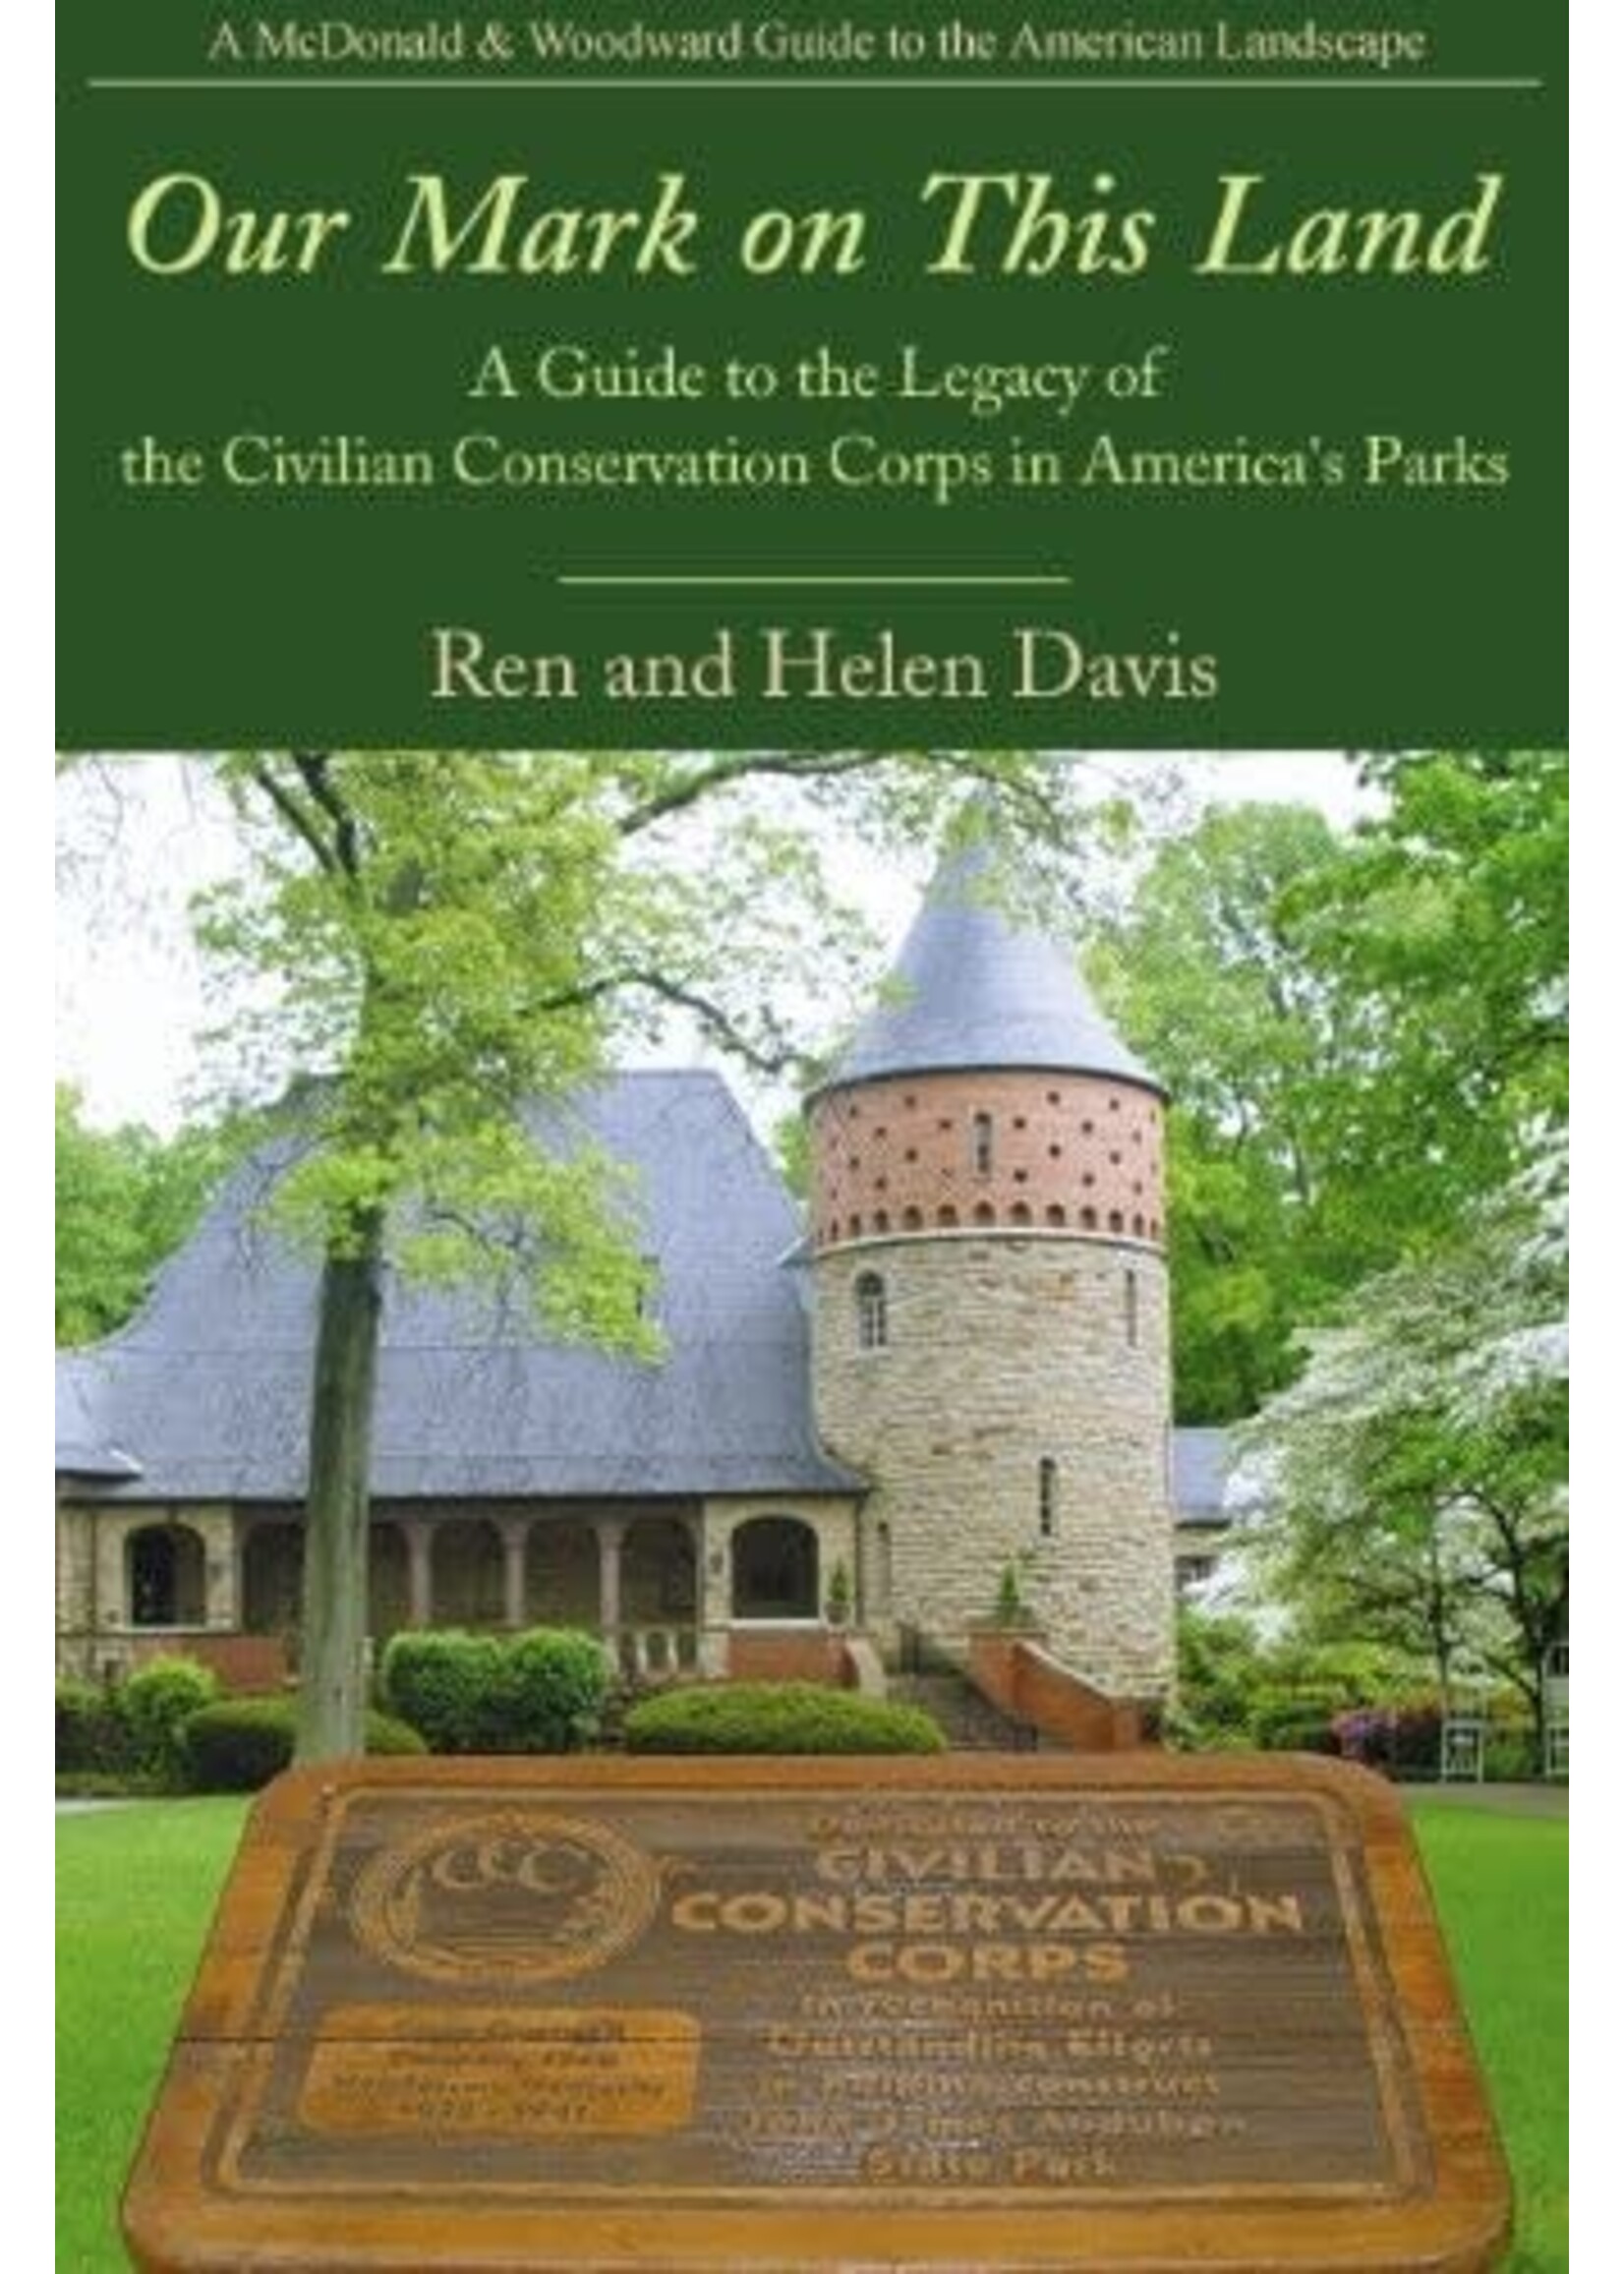 Our Mark on This Land: A Guide ot the Legacy of the Civilian Conservation Corps in America's Parks